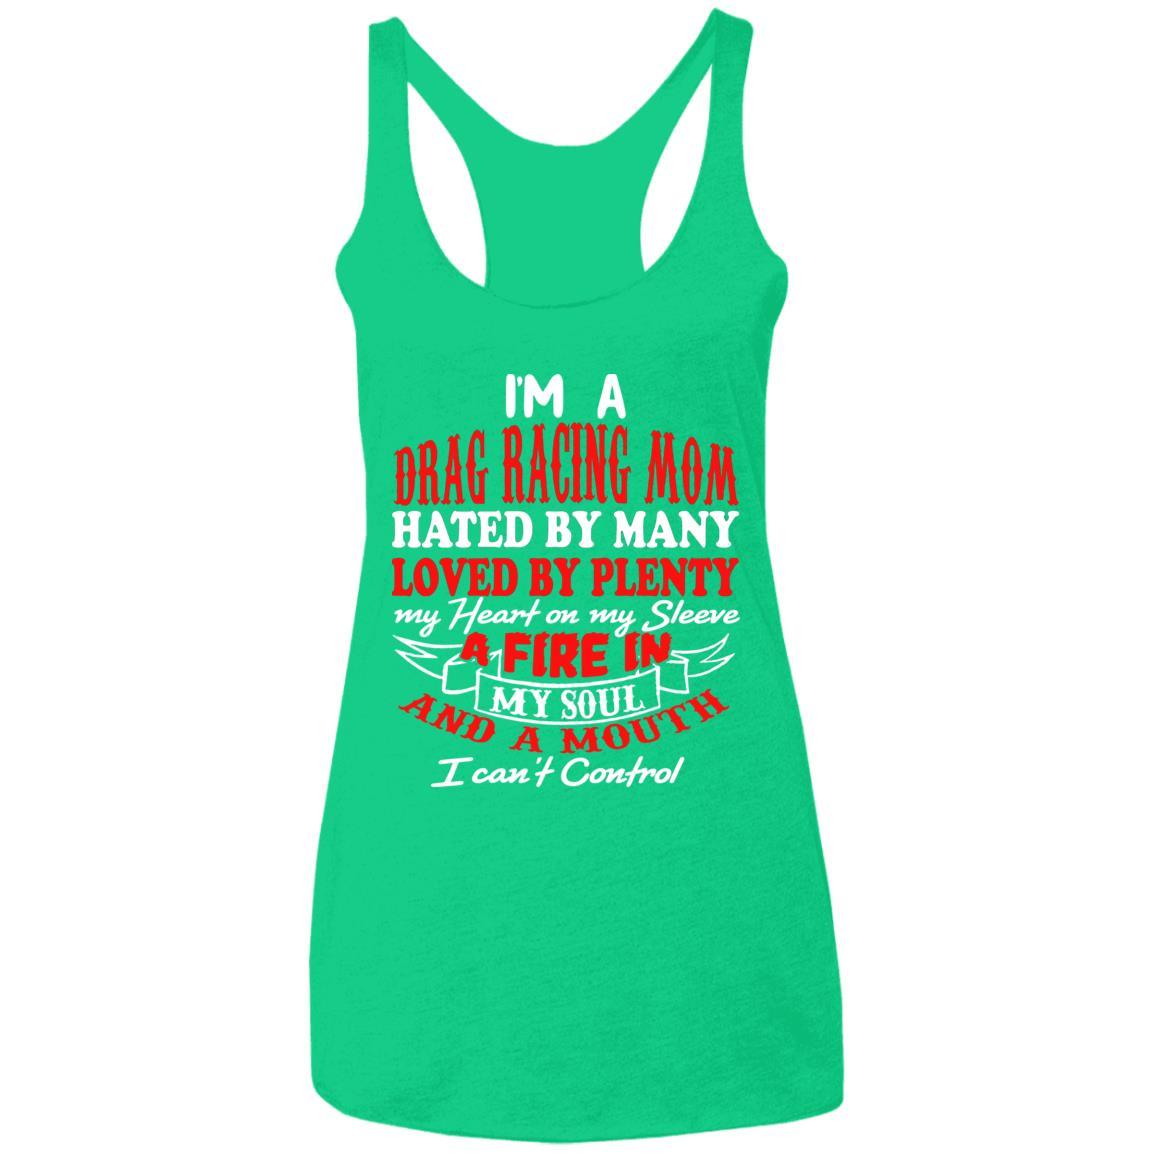 I'm A Drag Racing Mom Hated By Many Loved By Plenty Ladies' Triblend Racerback Tank